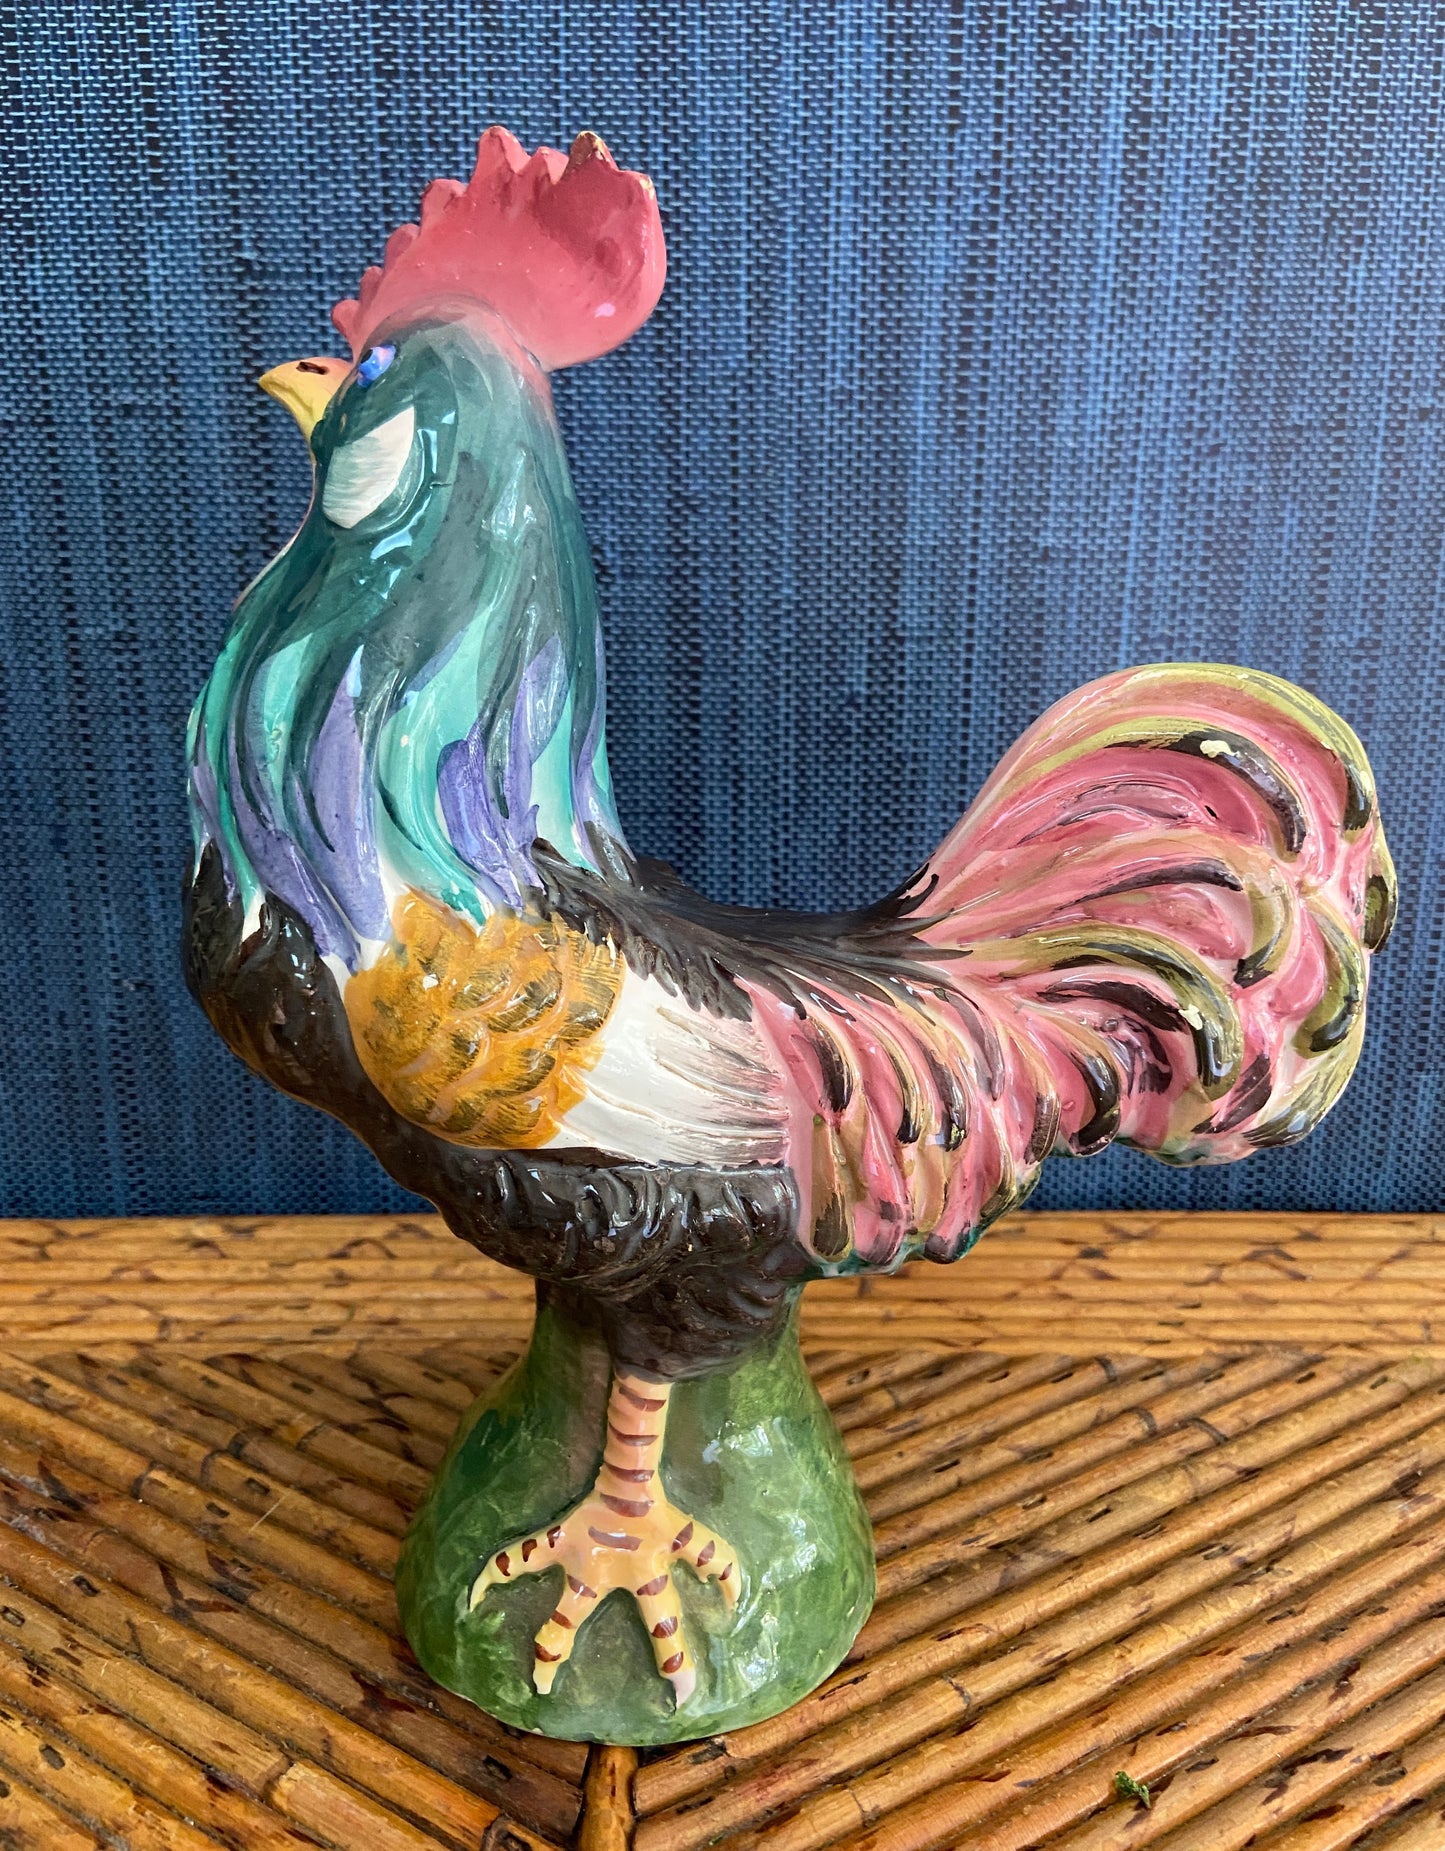 Vintage Italian Hand Painted Pottery Rooster